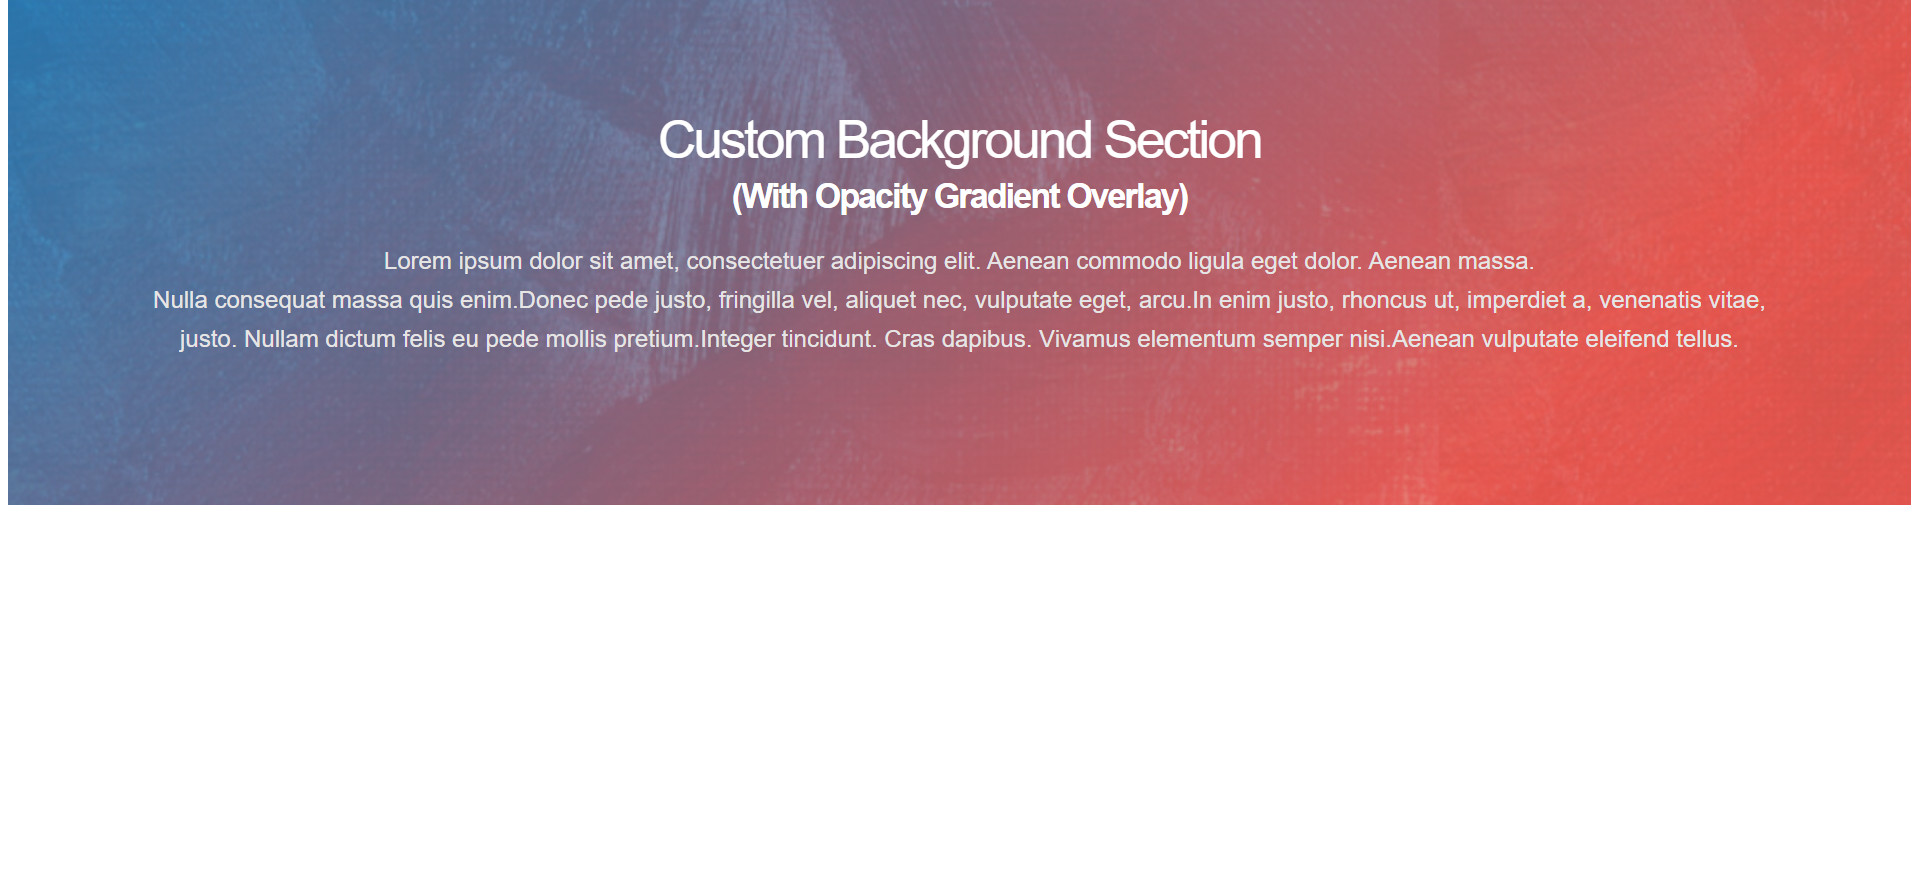 Shortcodes sections and parallax - custom-background-with-opacity-gradient-overlay แนะนำ เว็บไซต์สำเร็จรูป NineNIC